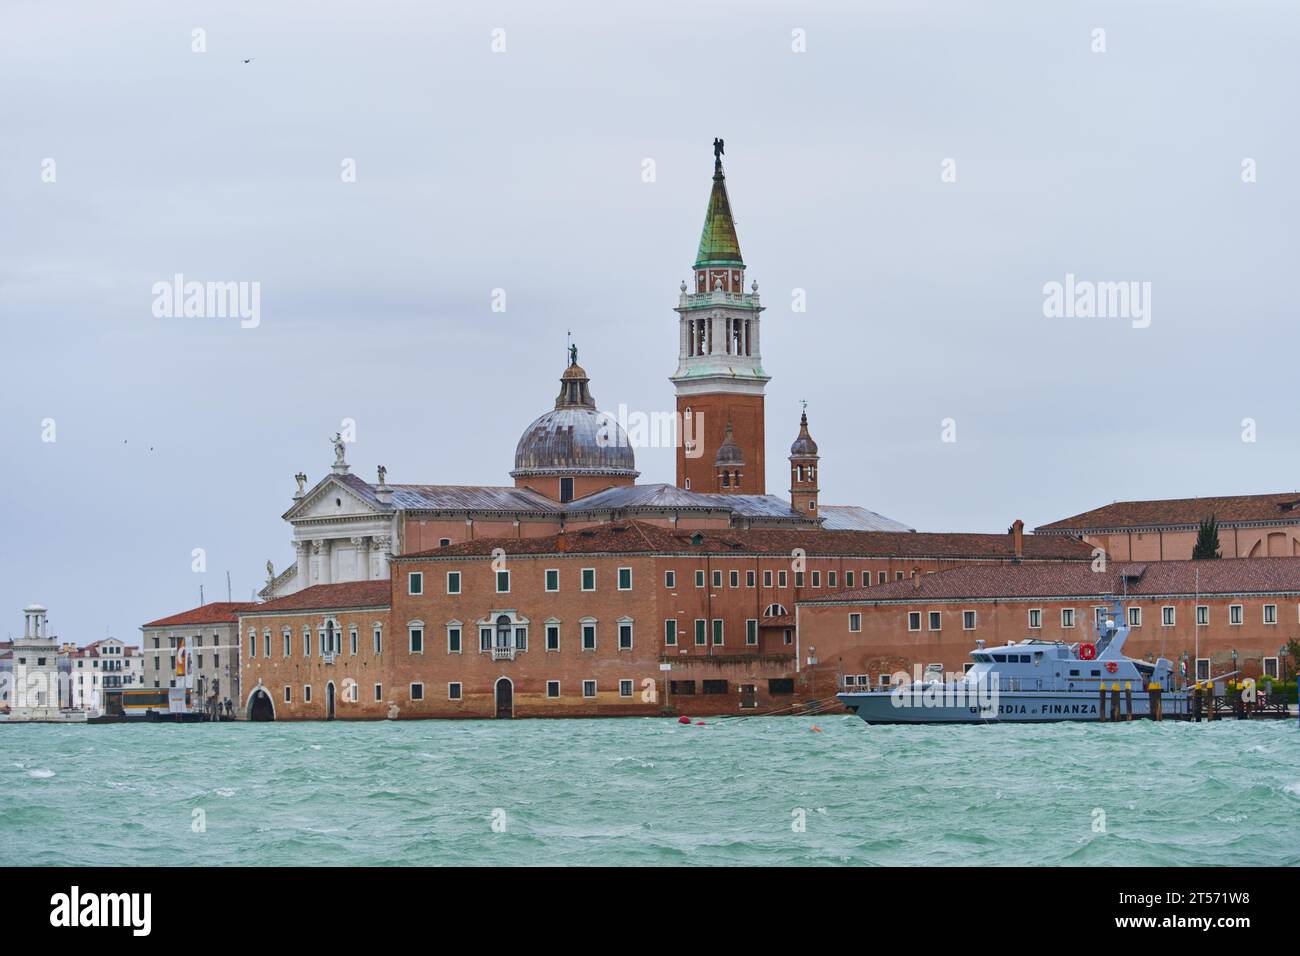 Church of San Giorgio Maggiore on the waterfront of Venetian canal. Venice - 5 May, 2019 Stock Photo